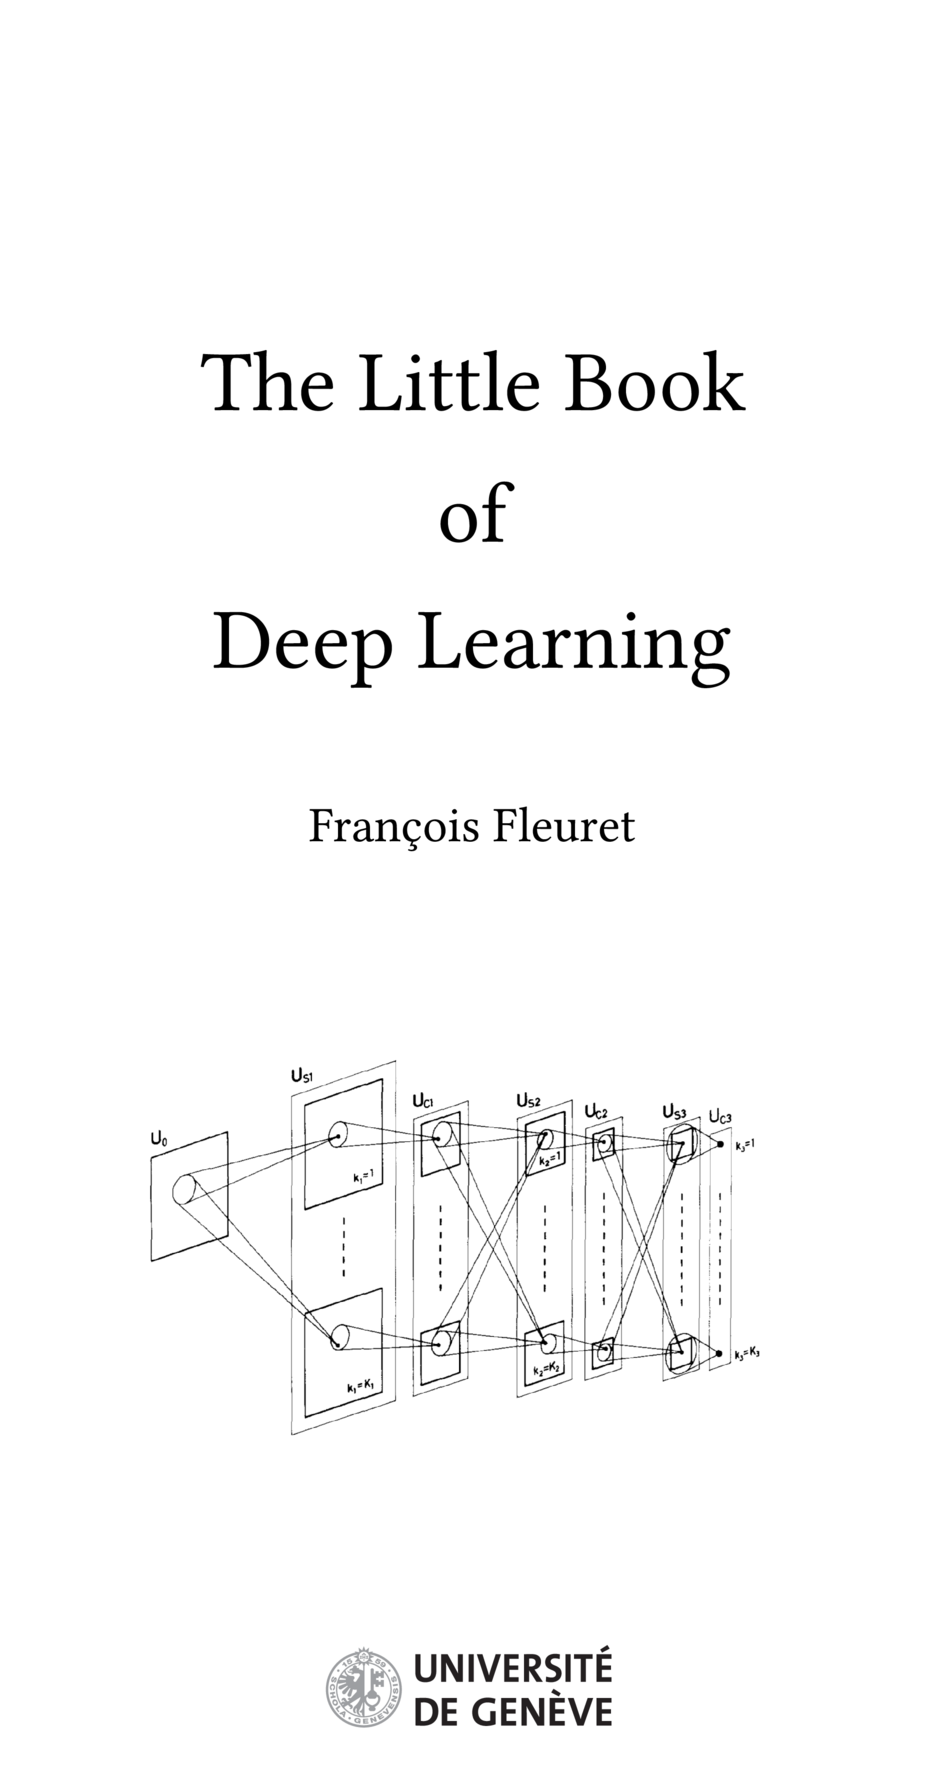 The cover of the Little Book of Deep Learning